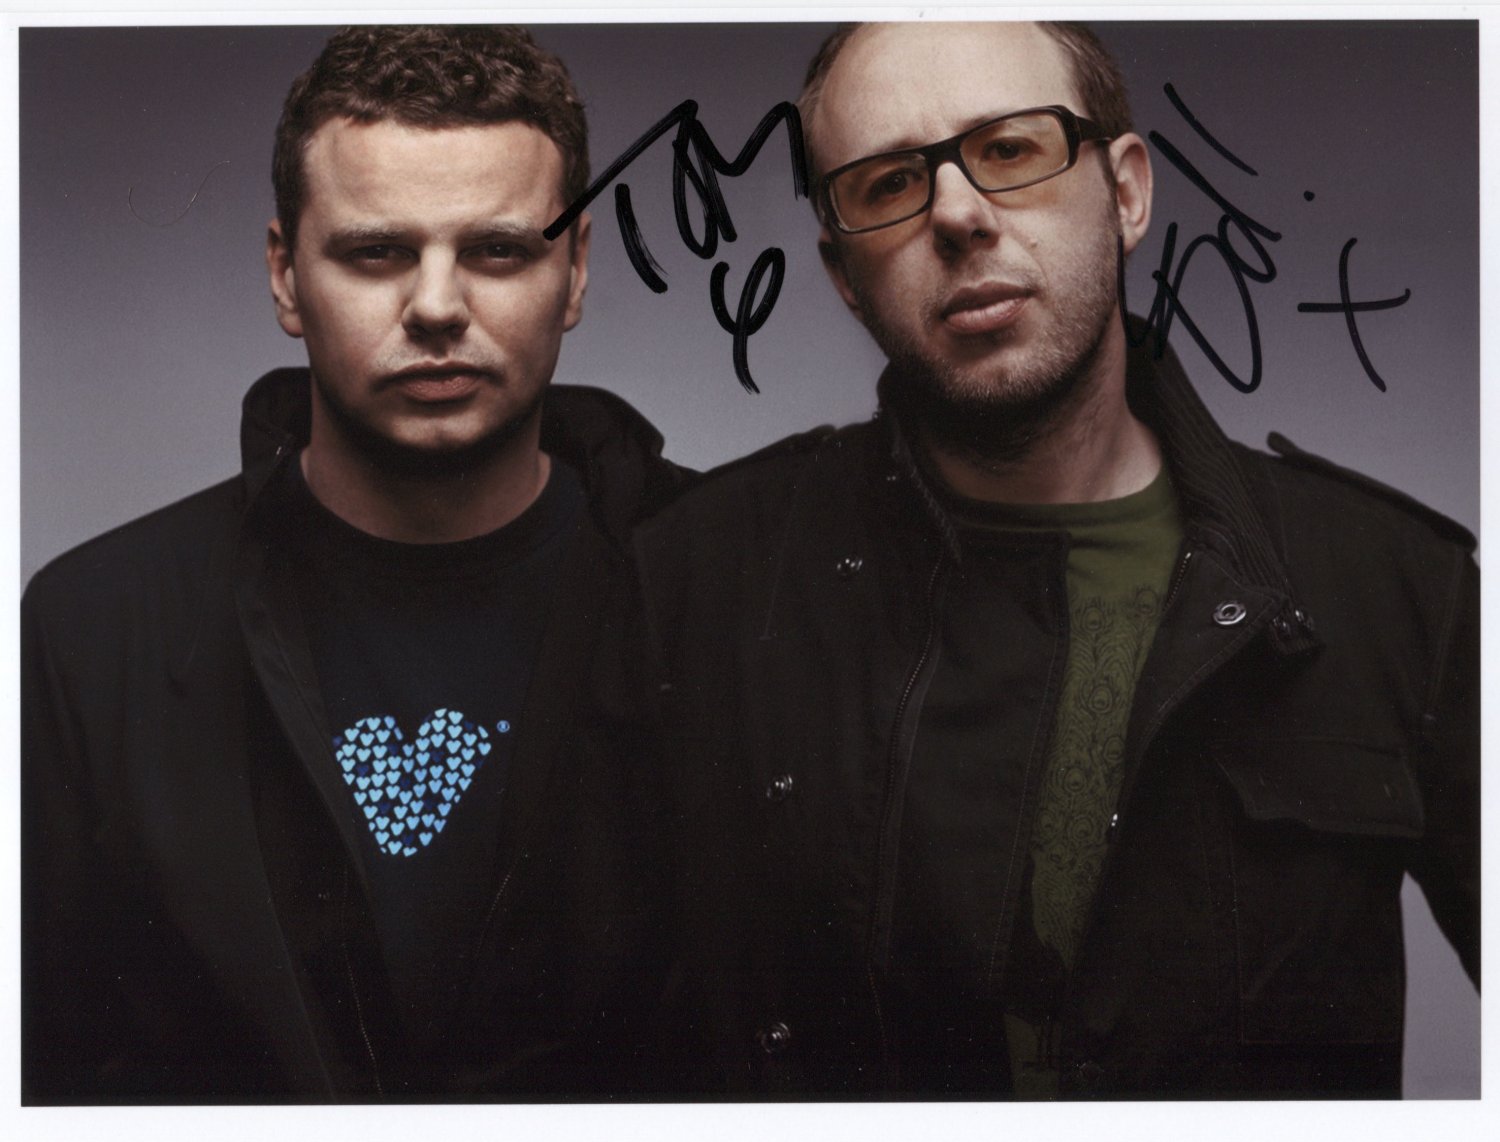 Chemical Brothers (Band) SIGNED 8" x 10" Photo + Certificate Of Authentication 100% Genuine